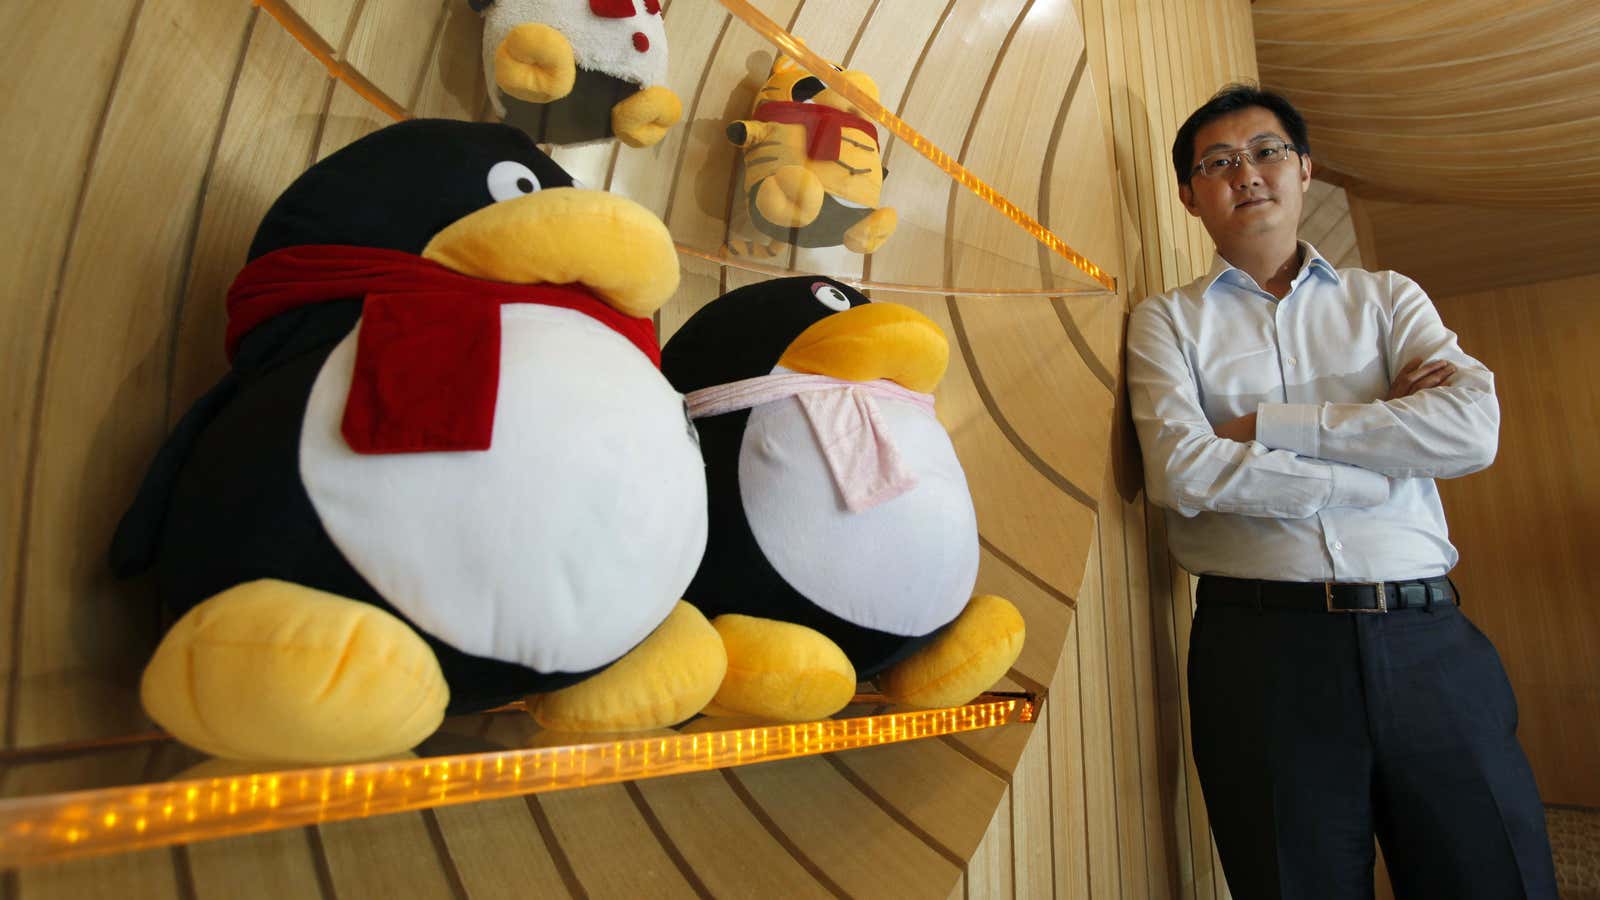 Tencent CEO Pony Ma stands beside mascots for QQ.com, the company’s instant-messaging service.